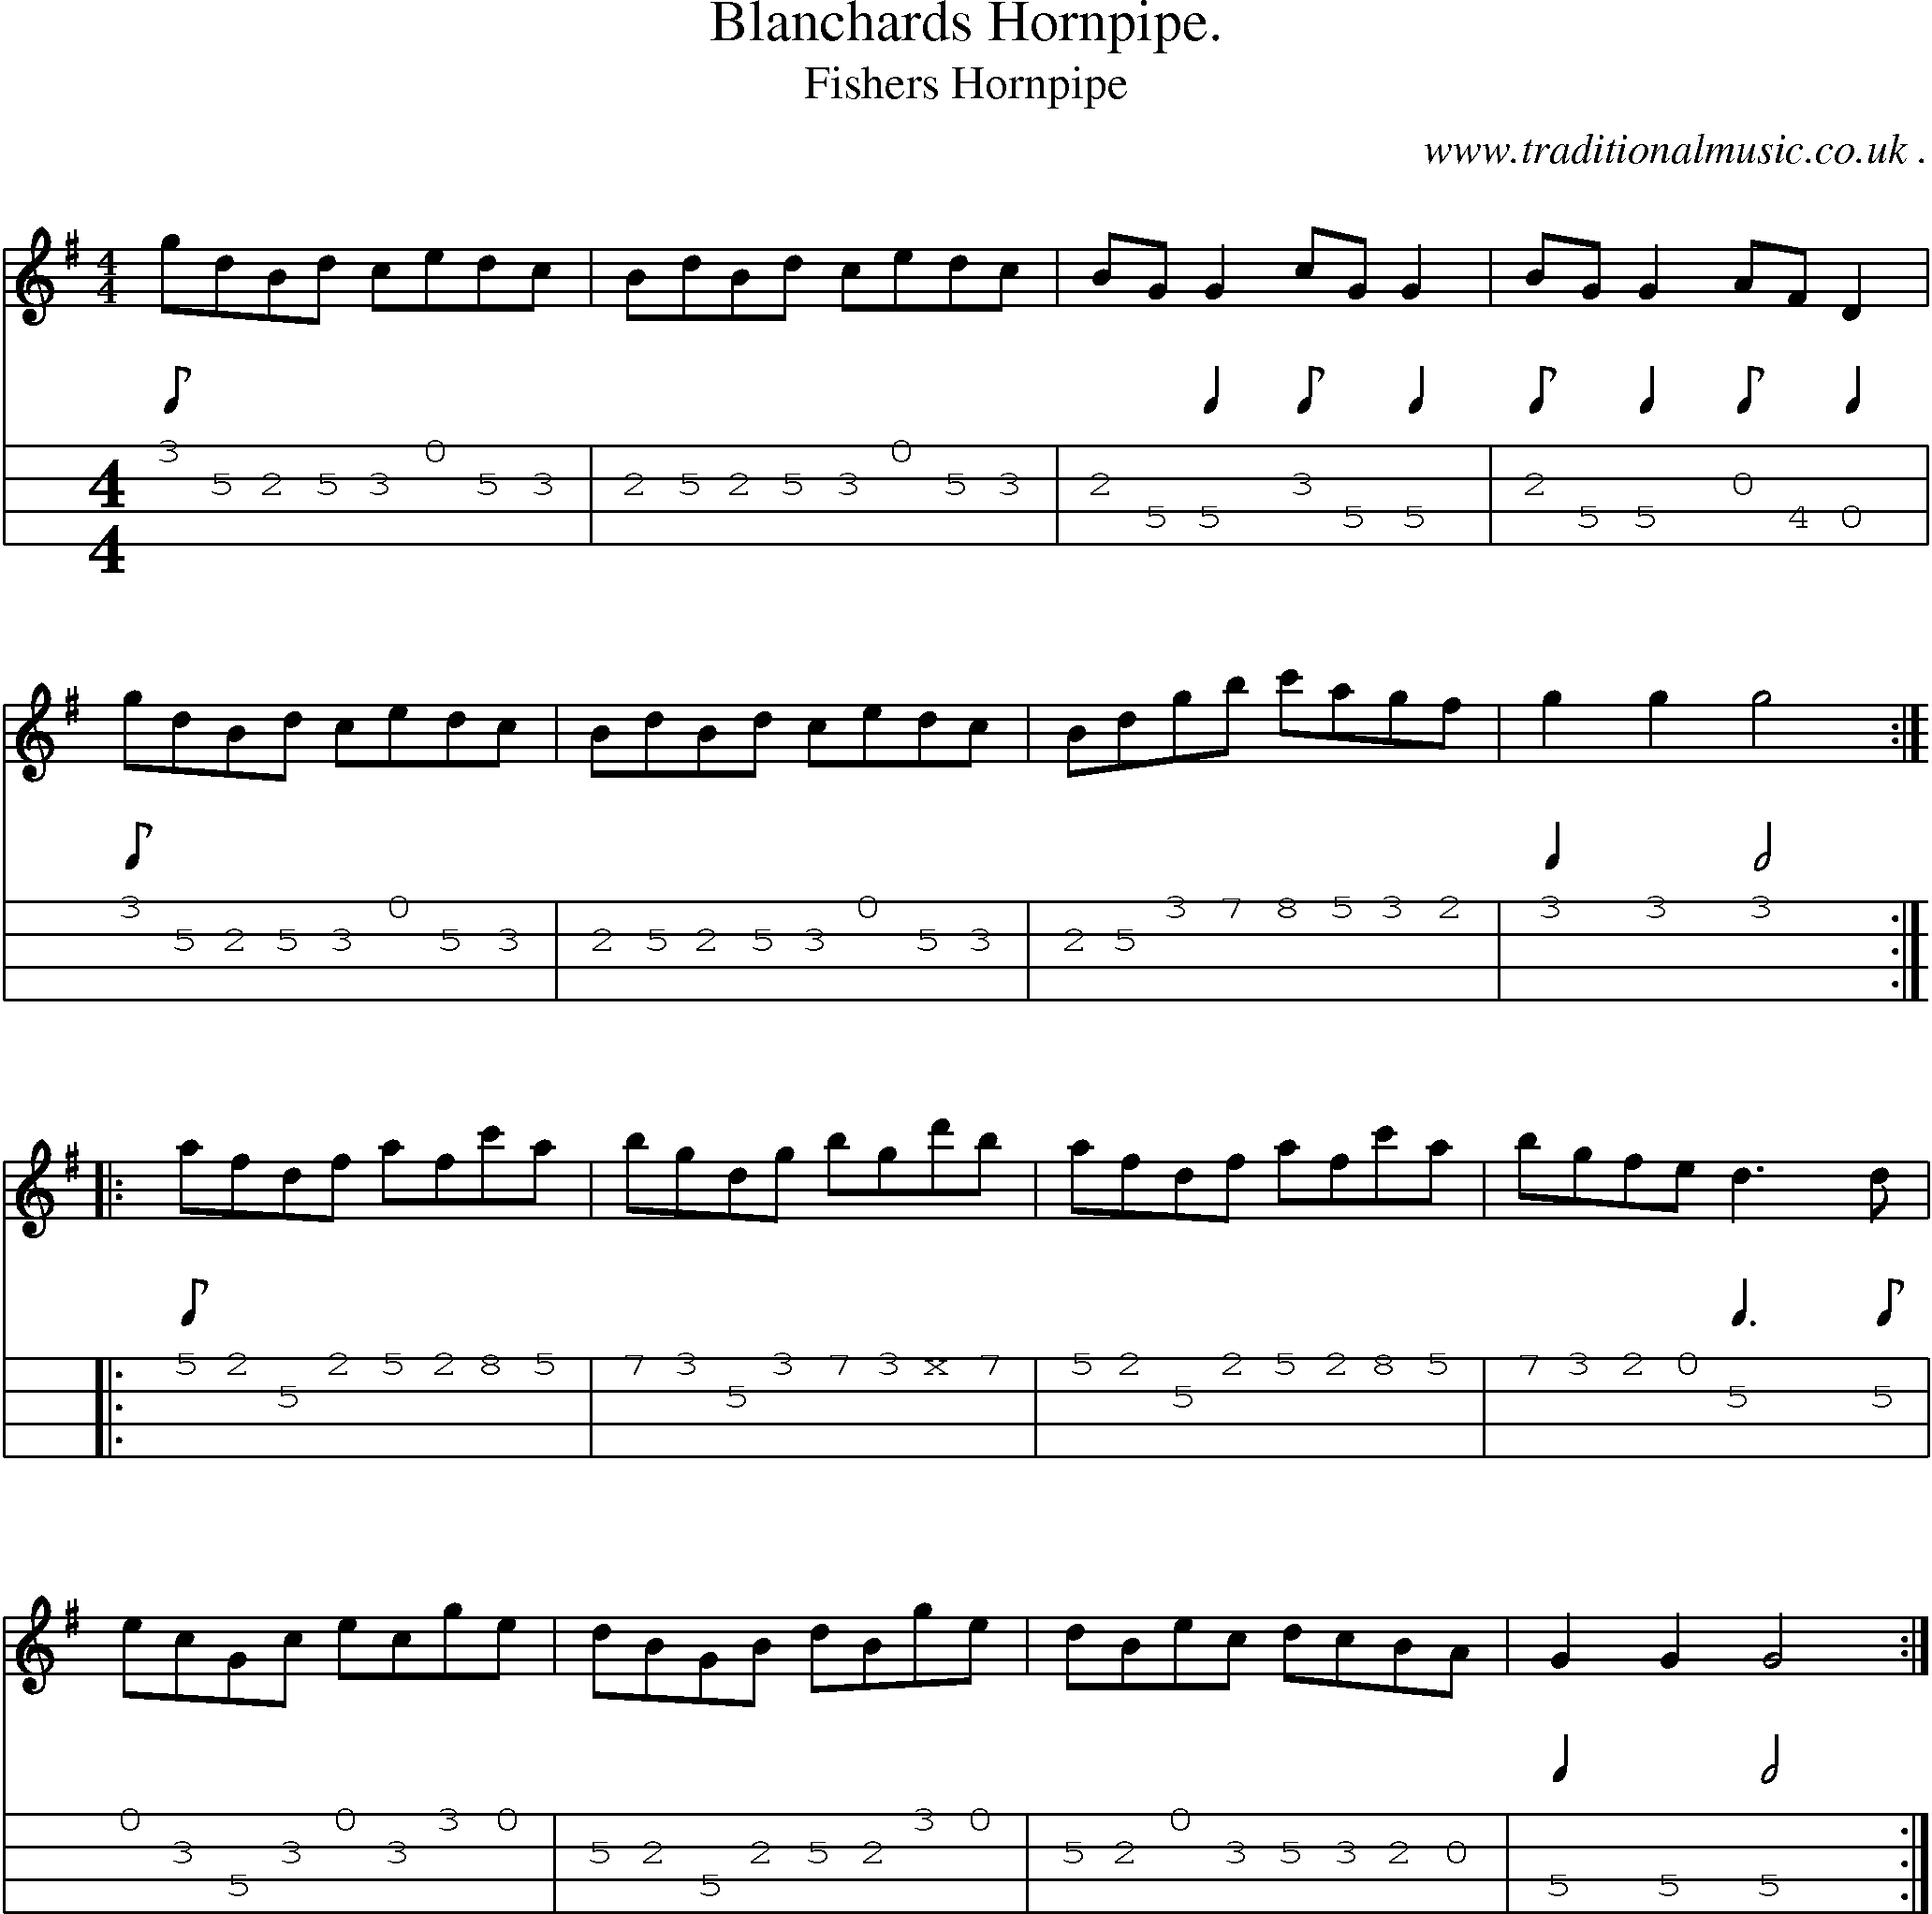 Sheet-Music and Mandolin Tabs for Blanchards Hornpipe 